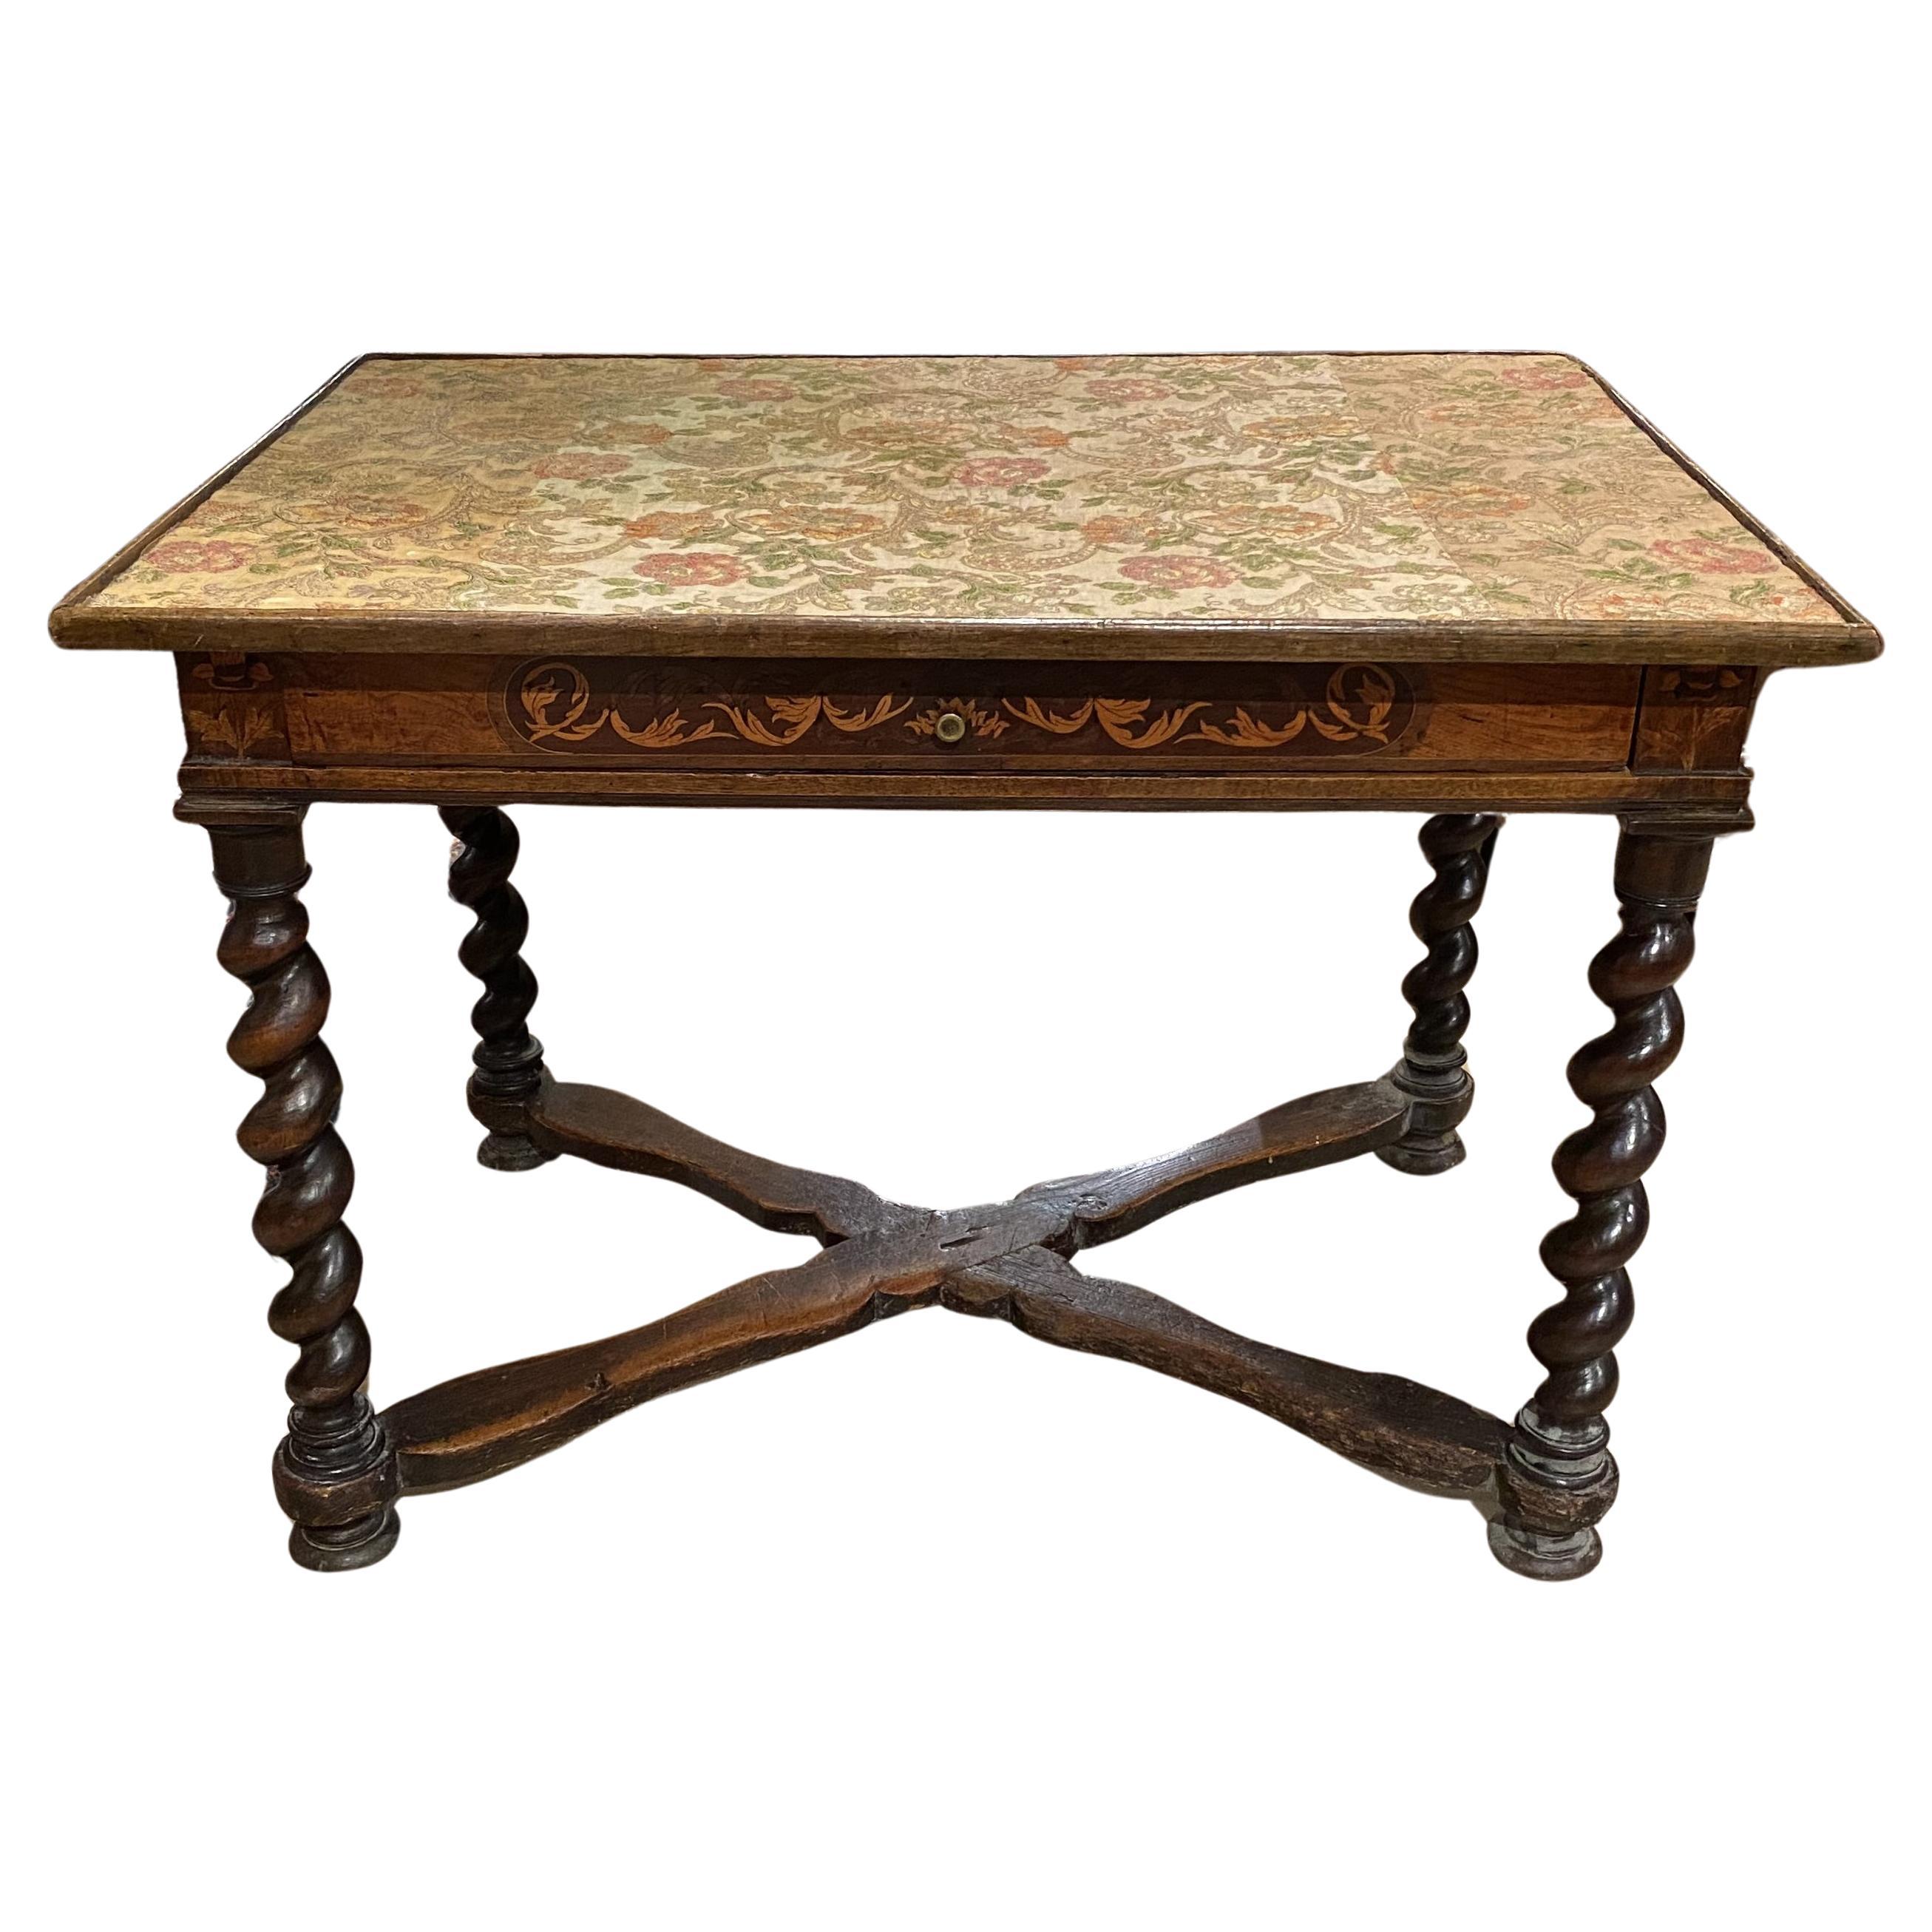 18th c Continental Fruitwood Table with Fabric Lined Top and Barley Twist Legs For Sale